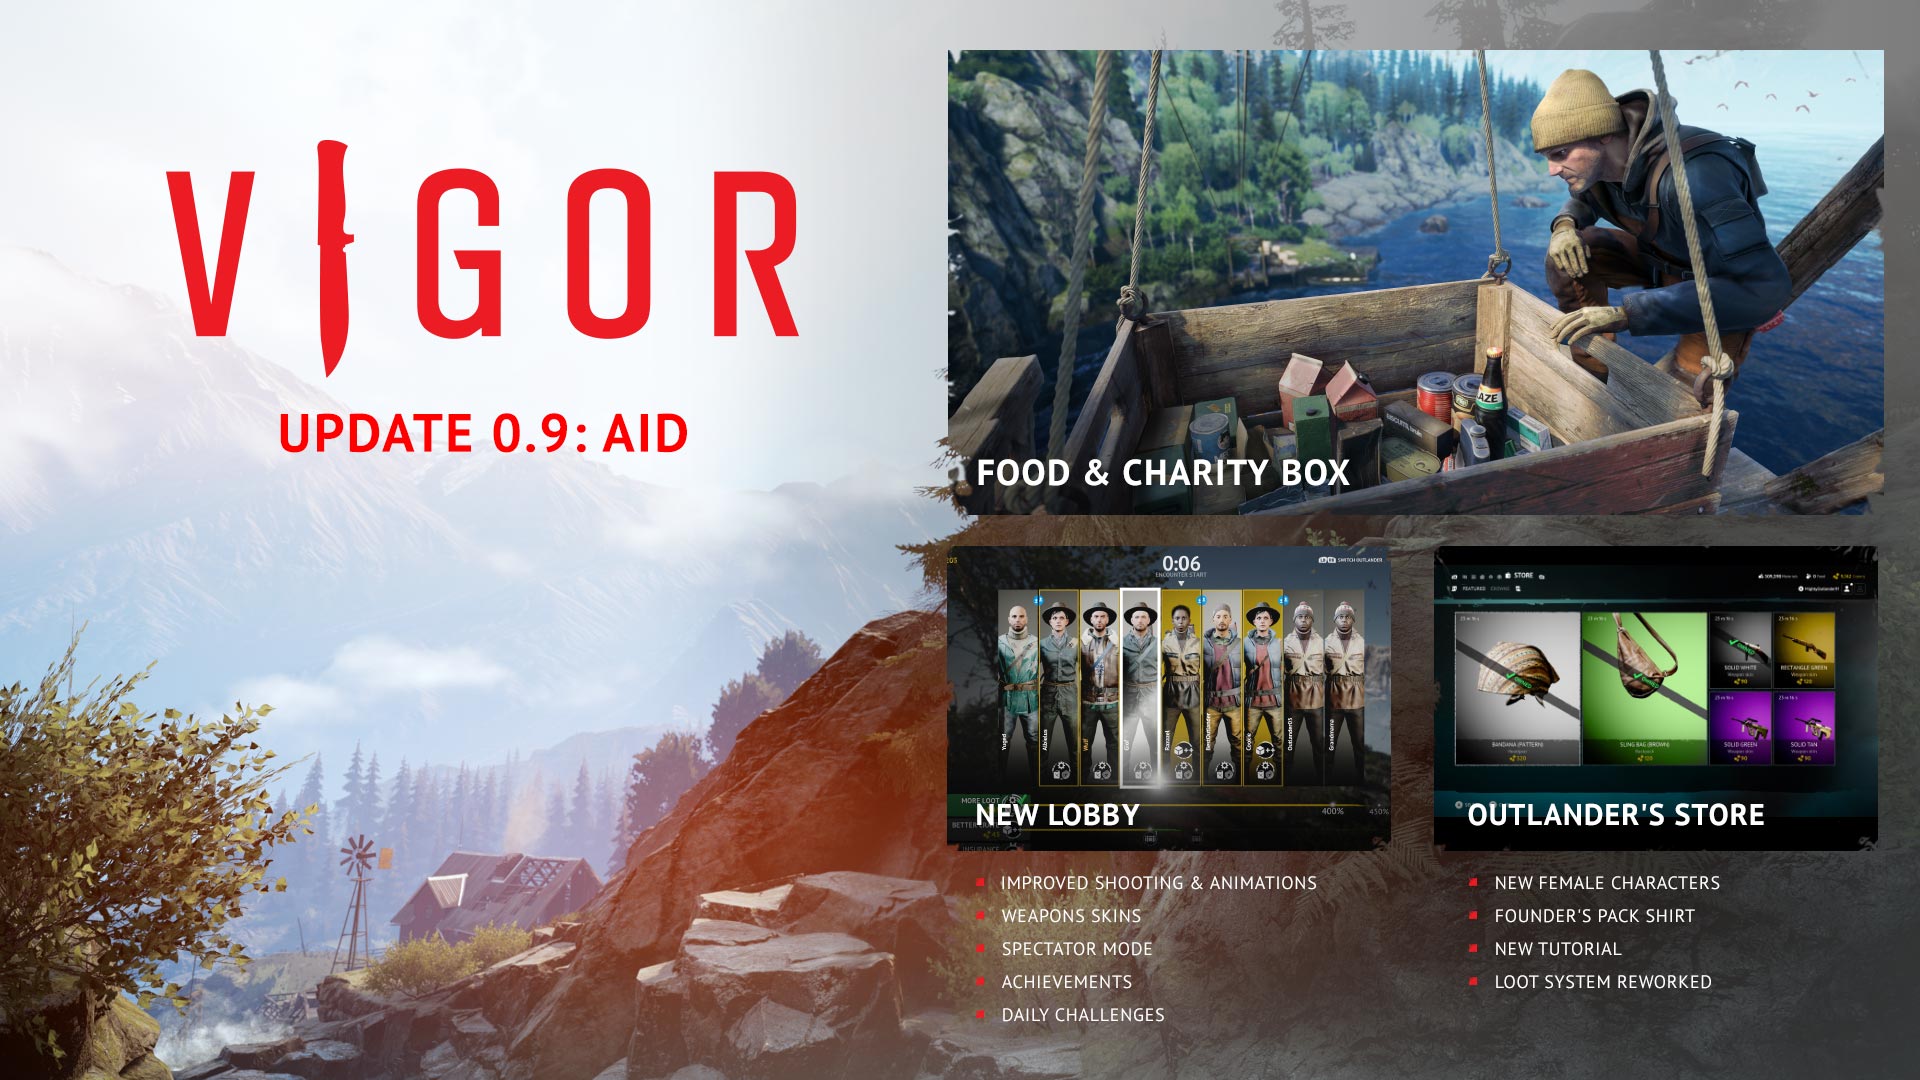 Vigor Update 0.9: Aid is Coming in July to Xbox One - Xbox Wire